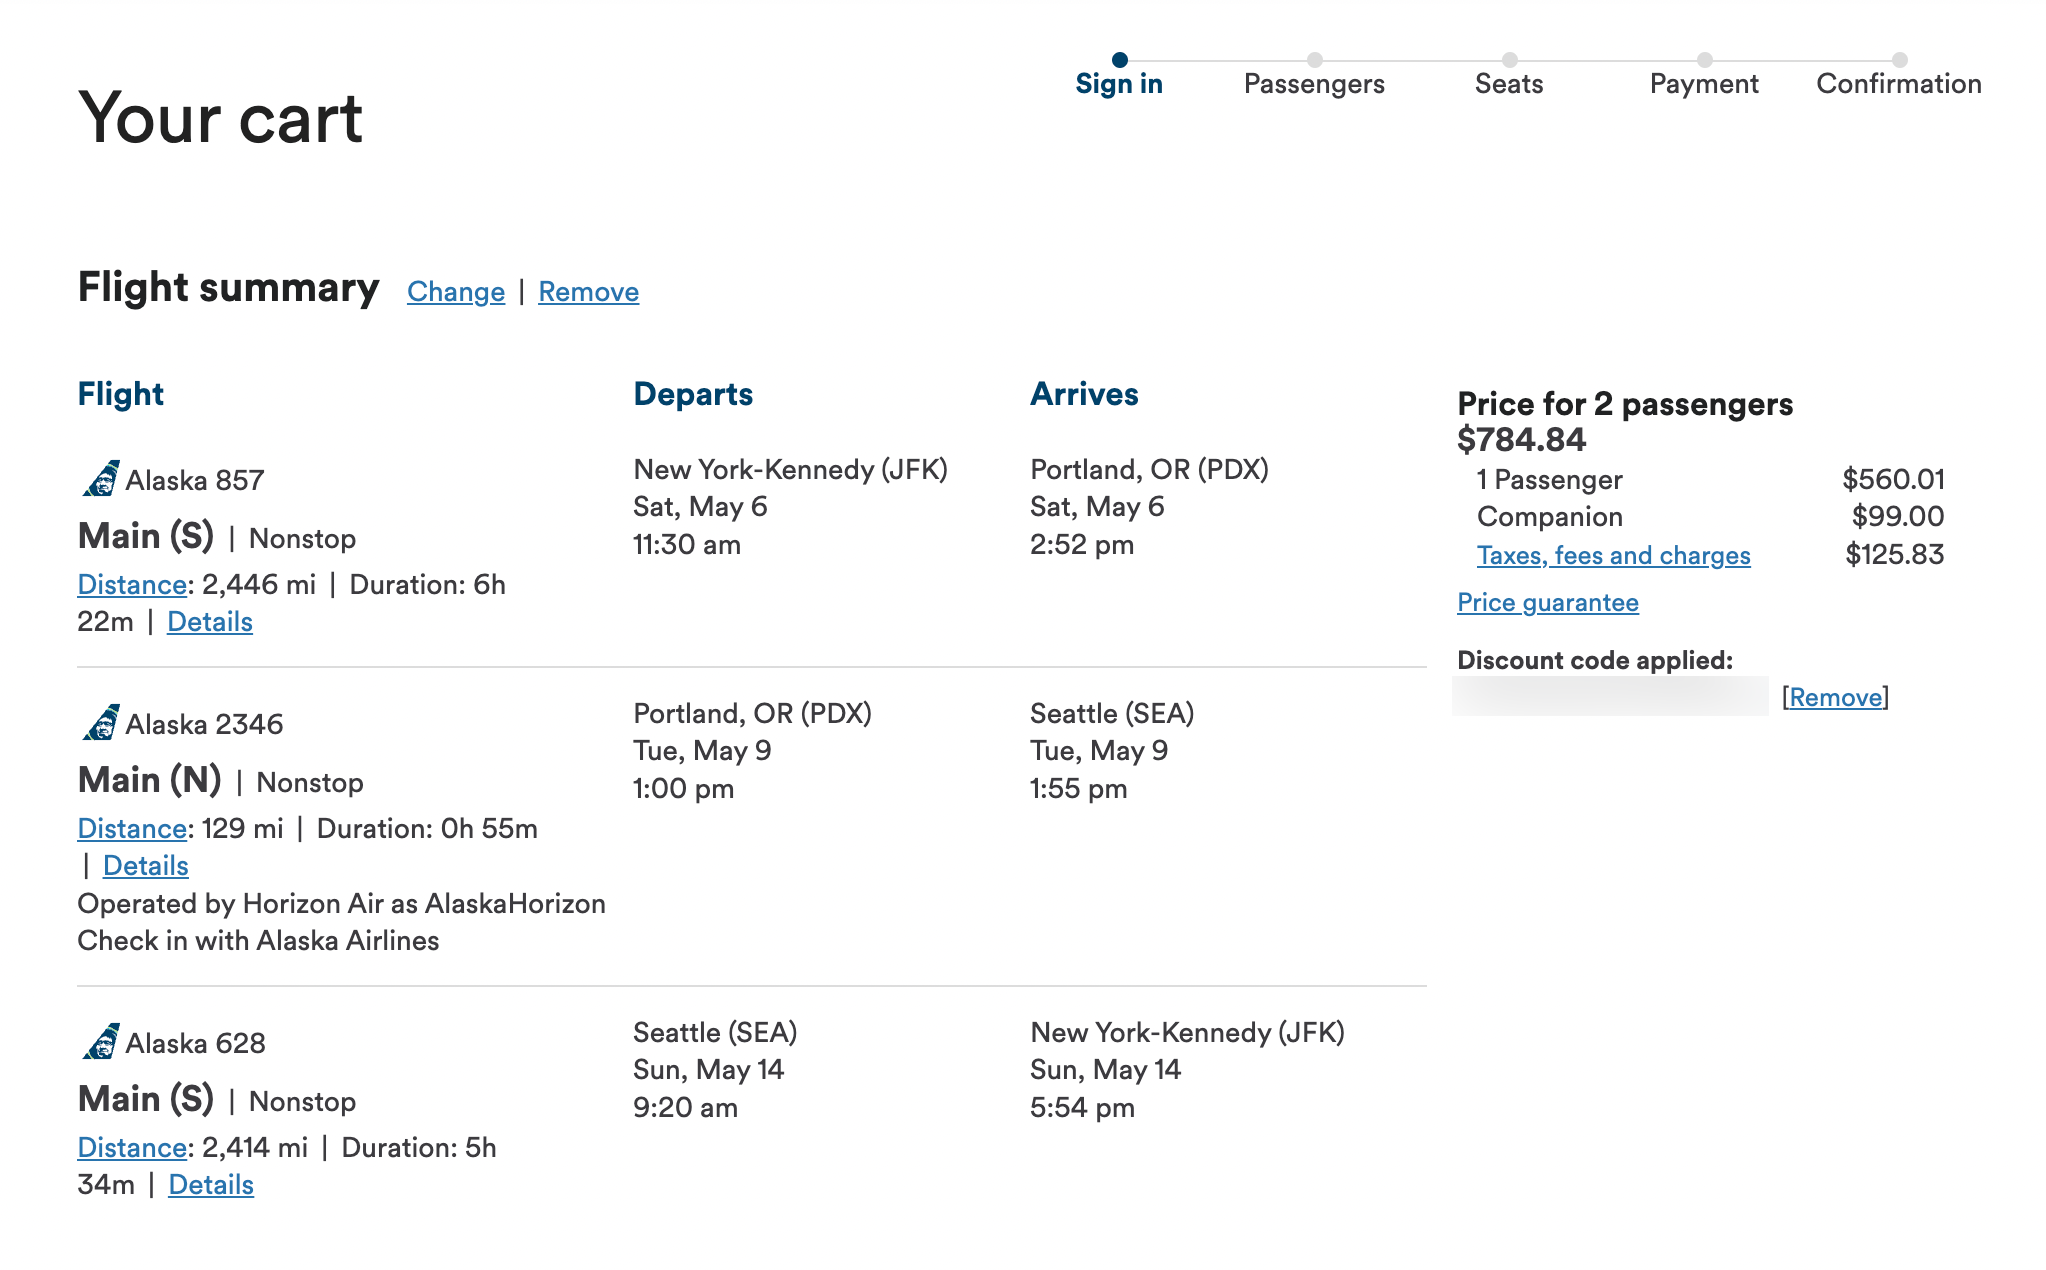 An Alaska Airlines flight with a stopover booked using the companion fare